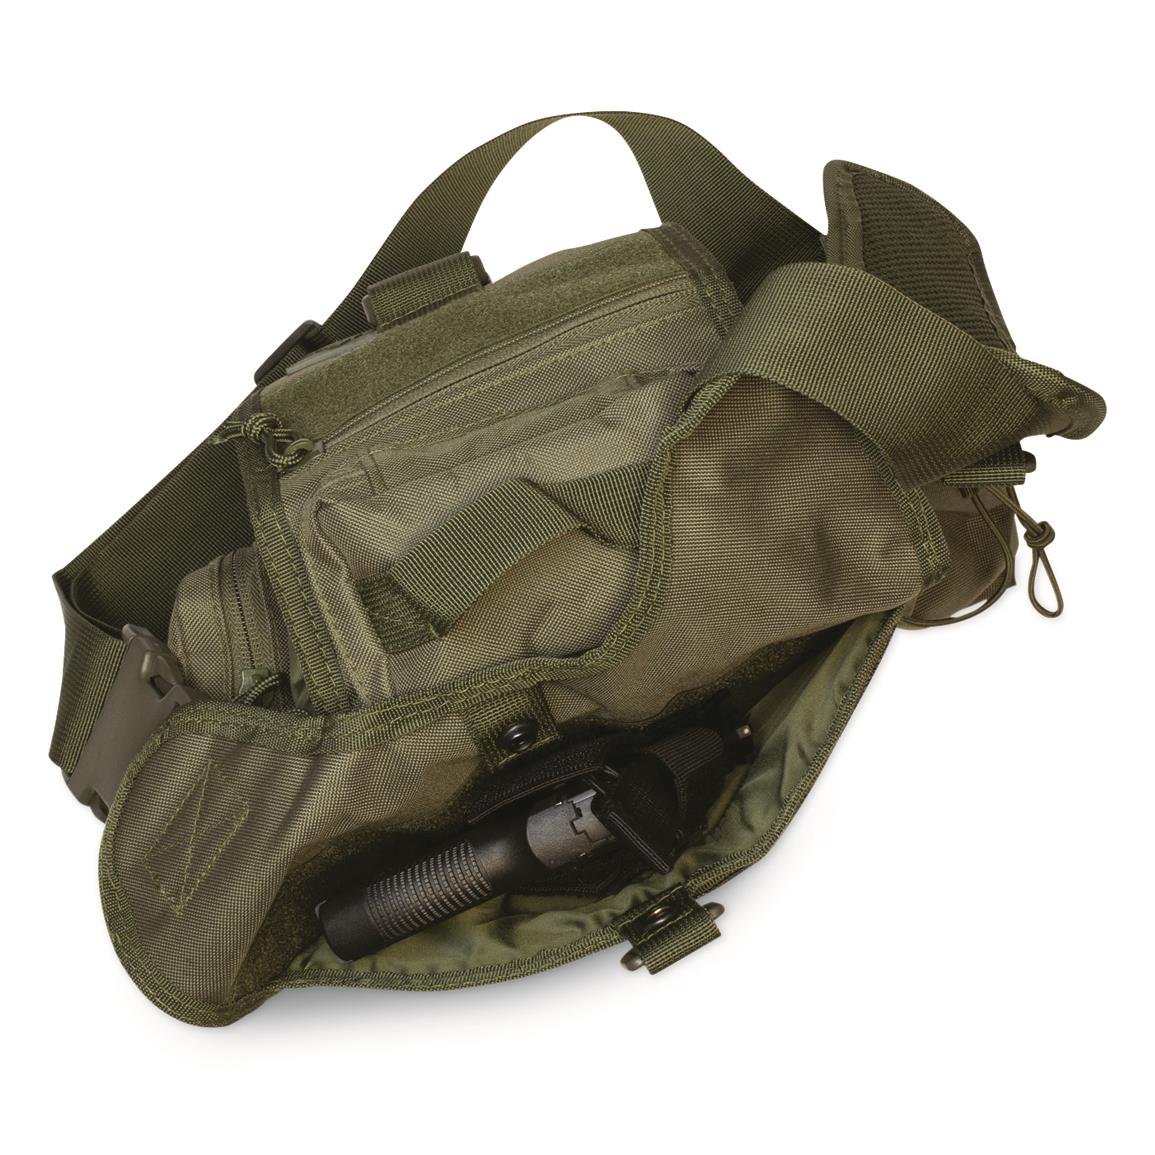 Fishing Sling Tackle and Gear Bag - 728014, Tackle Bags at Sportsman's ...